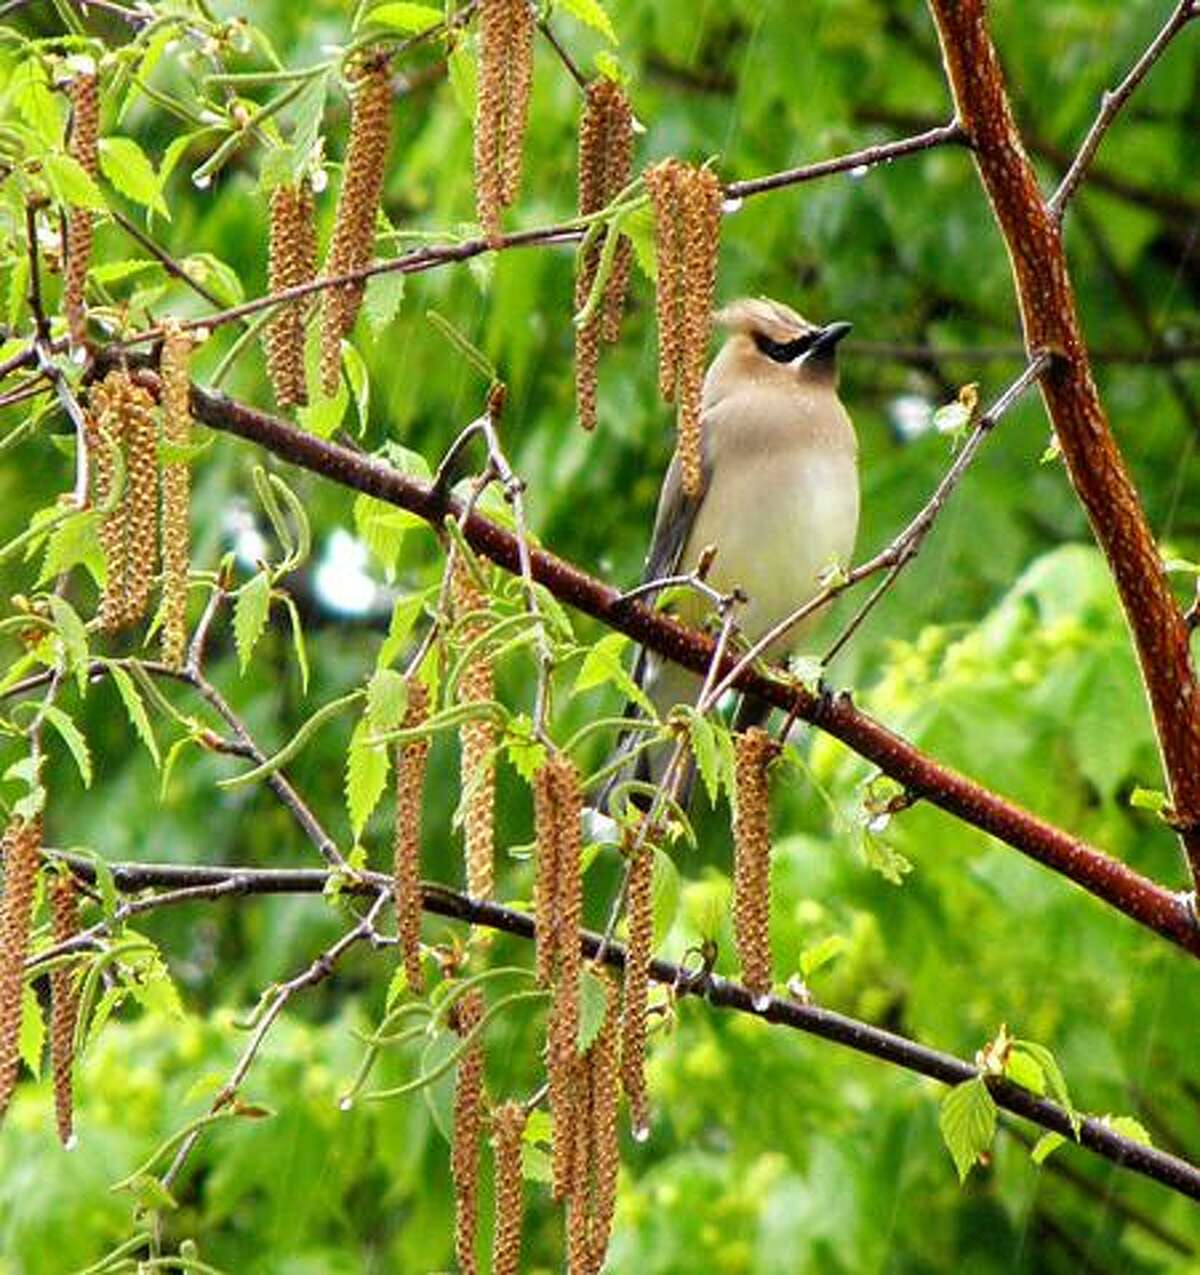 REASON TO KEEP THE CAMERA HANDY: Gwen Heuss-Severance sent along this image and note: "We enjoy reading Kathleen's column ... The return of the cedar waxwings to our Hamden backyard to gorge on juniper berries is always a welcome sign of spring."